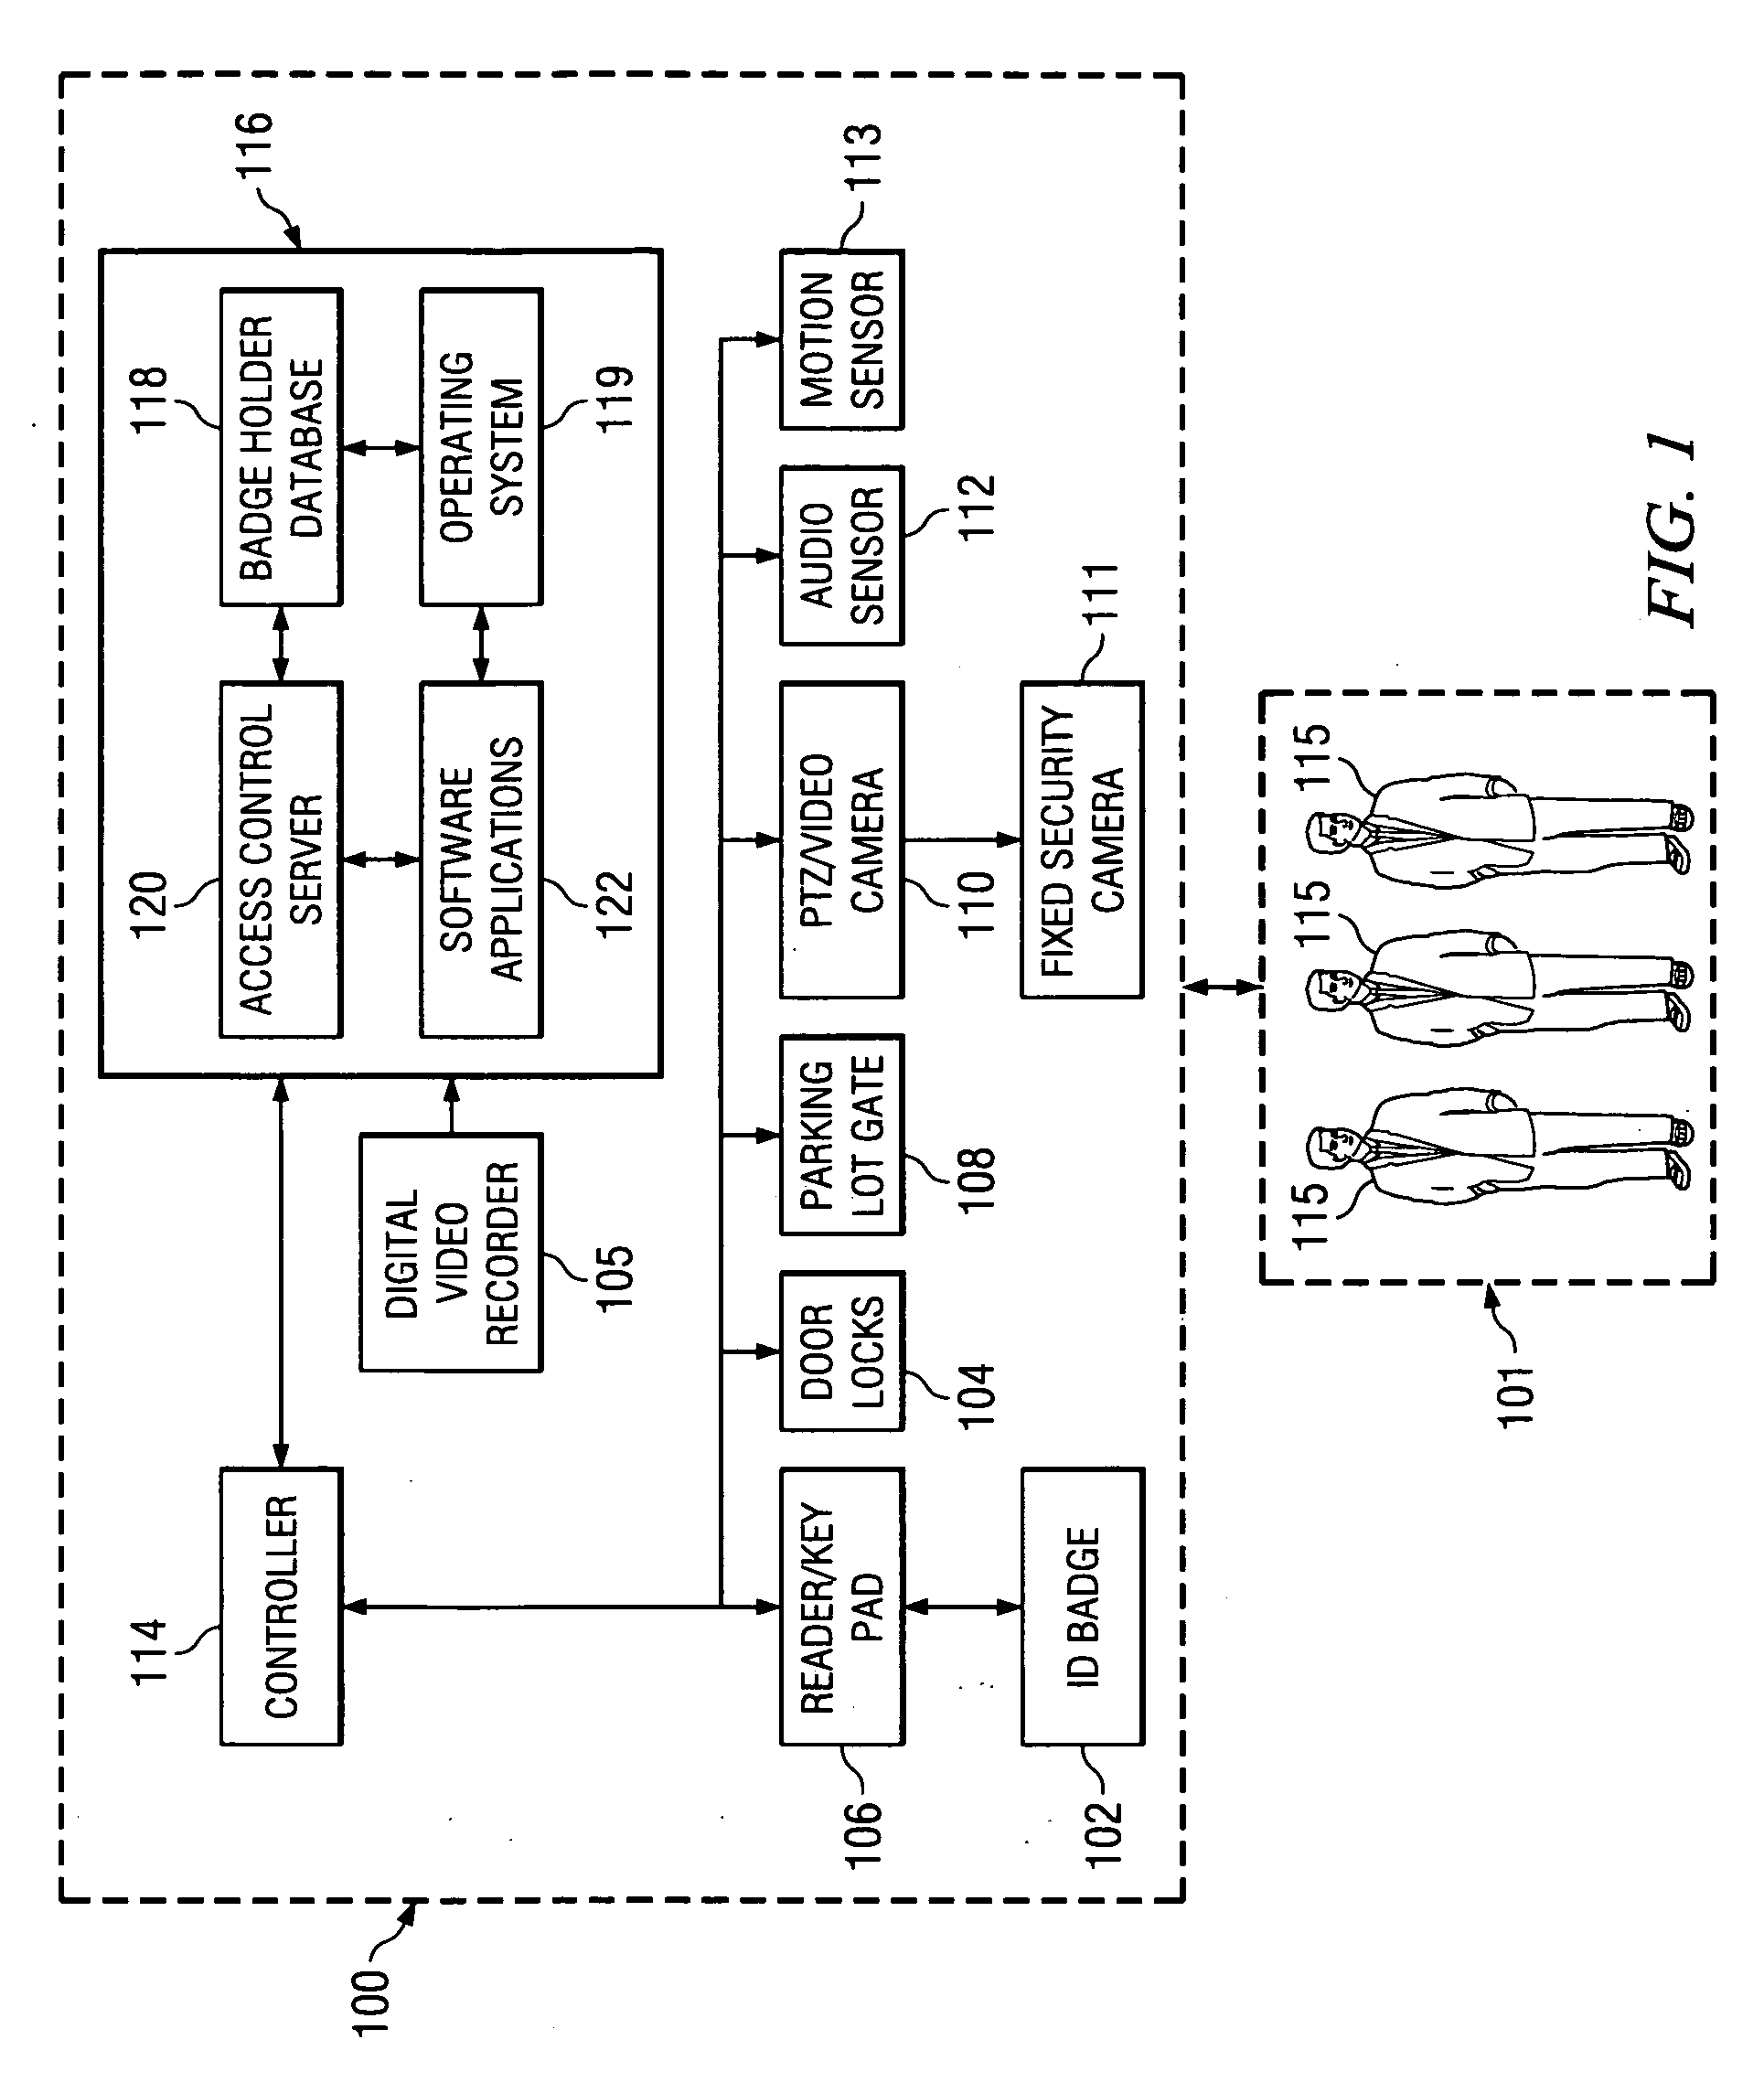 System and method for deployment and financing of a security system